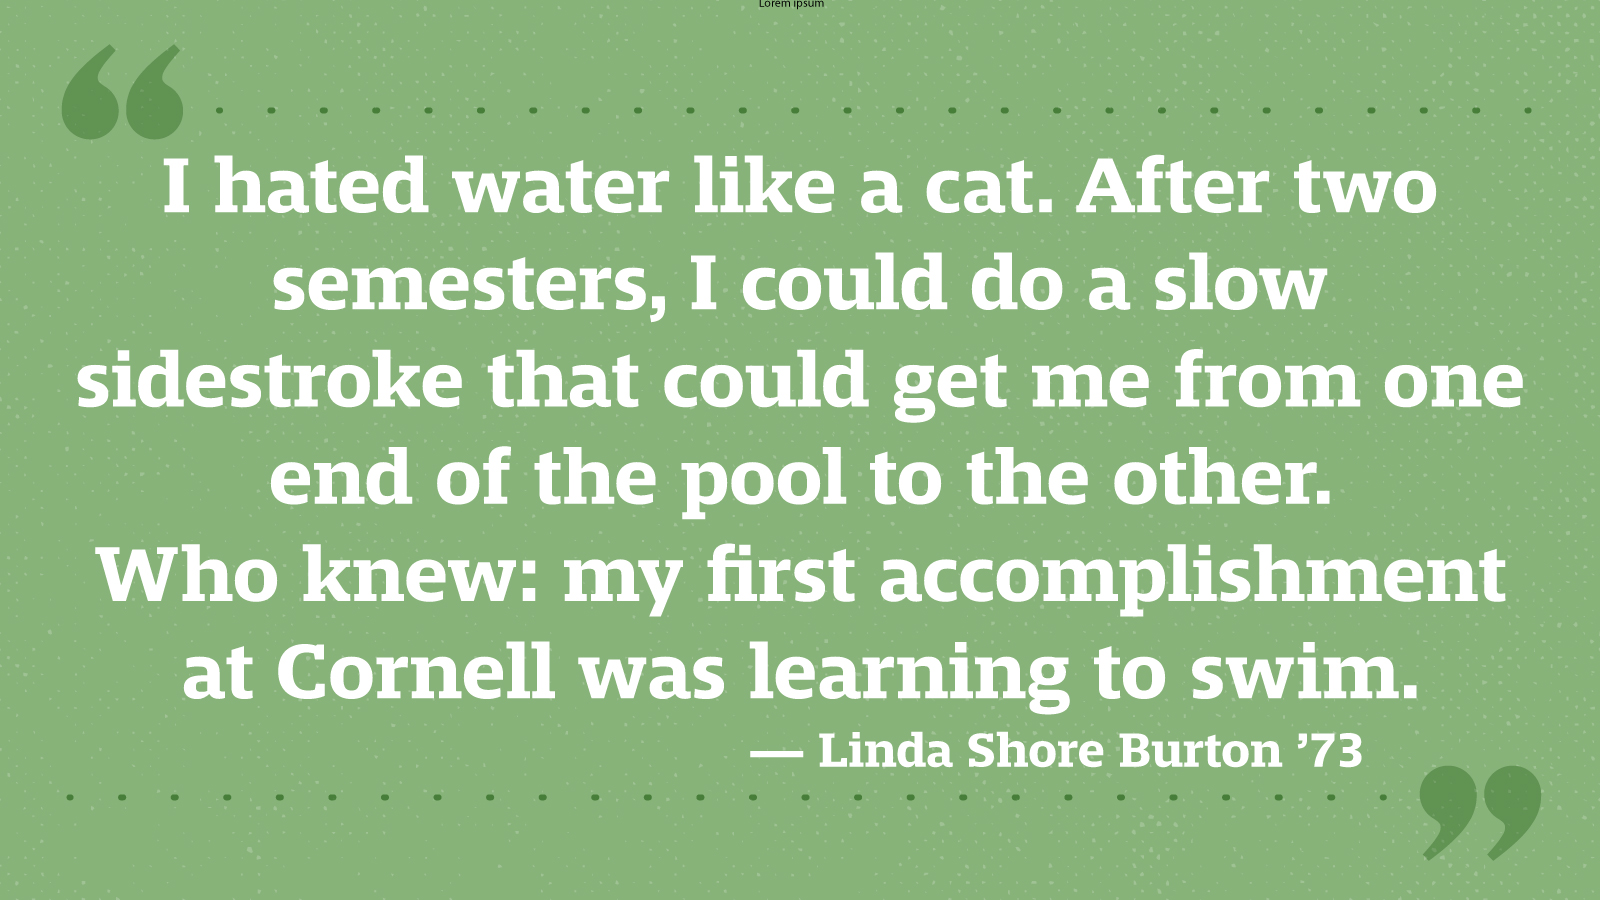 I hated water like a cat. After two semesters, I could do a slow sidestroke that could get me from one end of the pool to the other. Who knew: my first accomplishment at Cornell was learning to swim. — Linda Shore Burton ’73